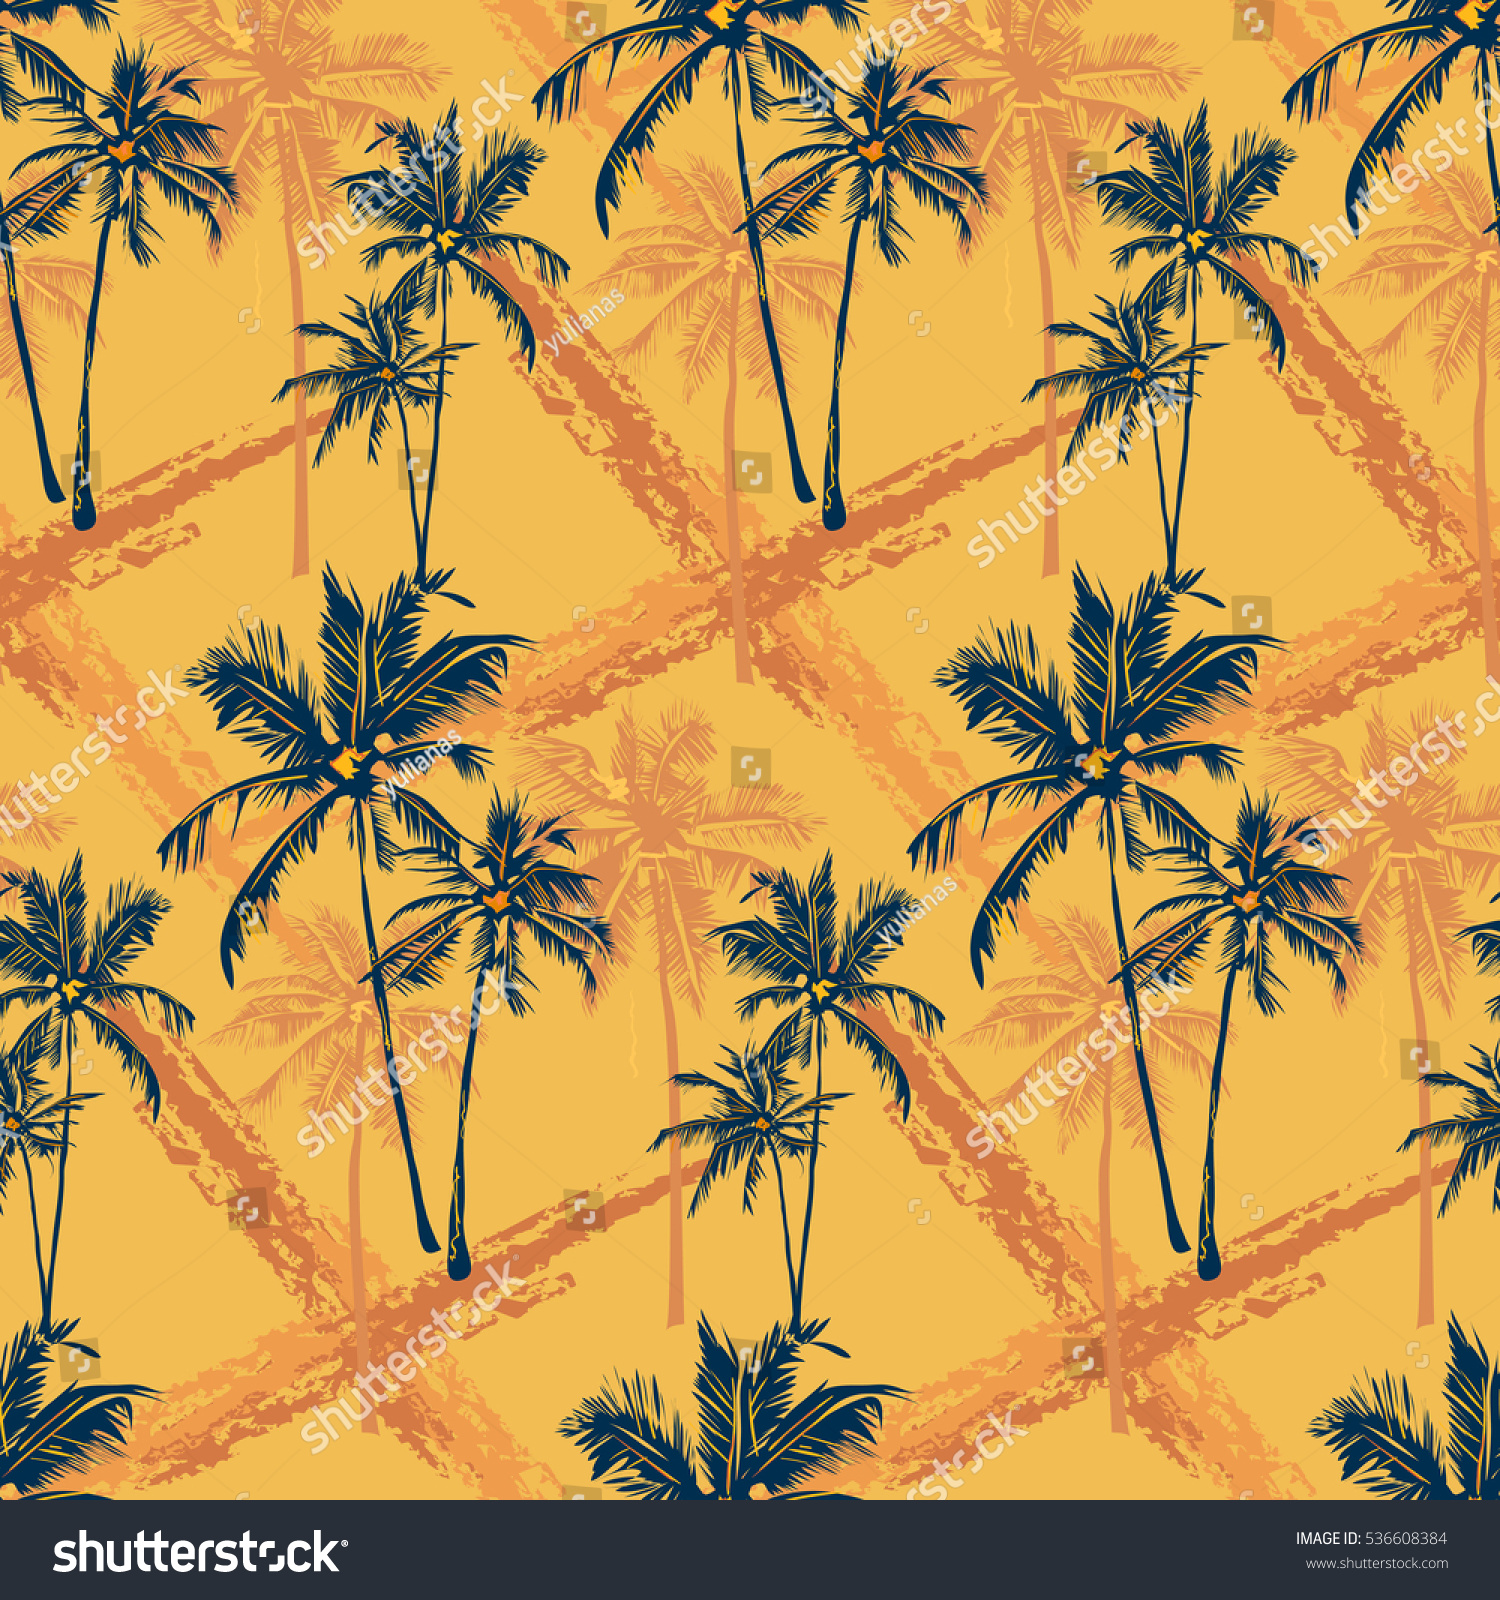 Seamless Vector Tropical Pattern Depicting Palm Stock Vector (Royalty ...